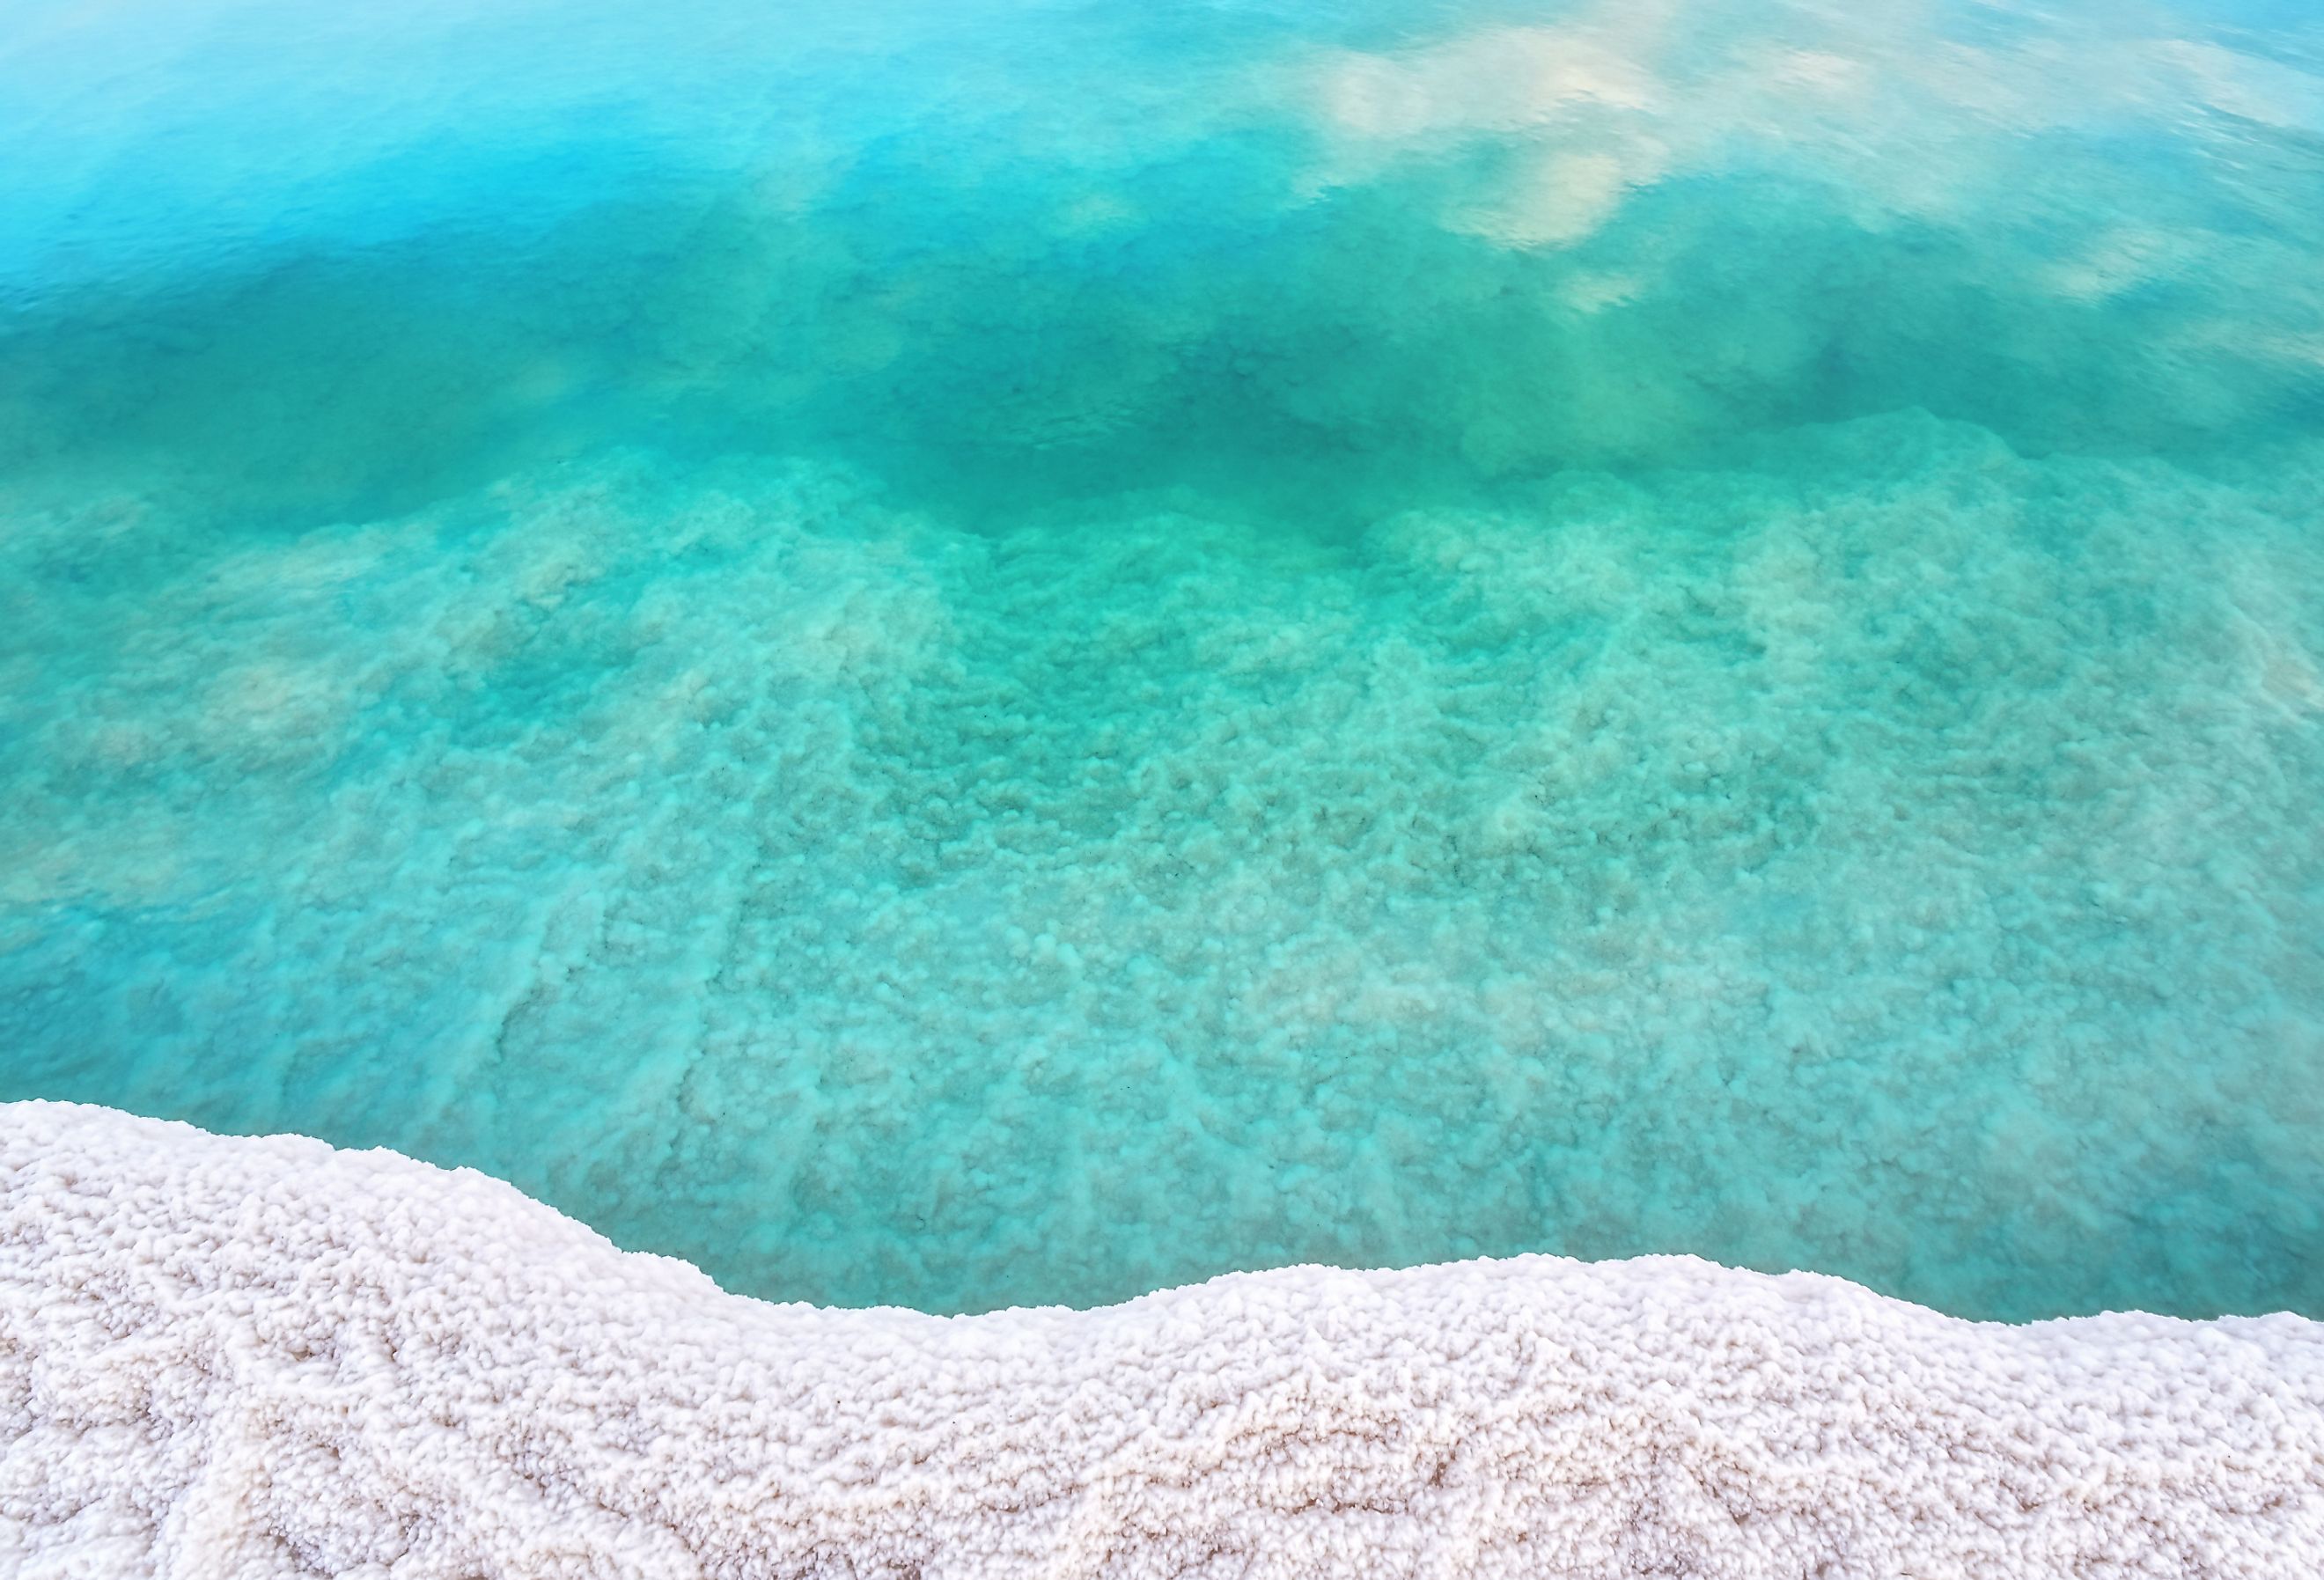 Shore of Dead sea in Ein Bokek, Israel, white salt crystals outside and at the bottom, turquoise clear water.